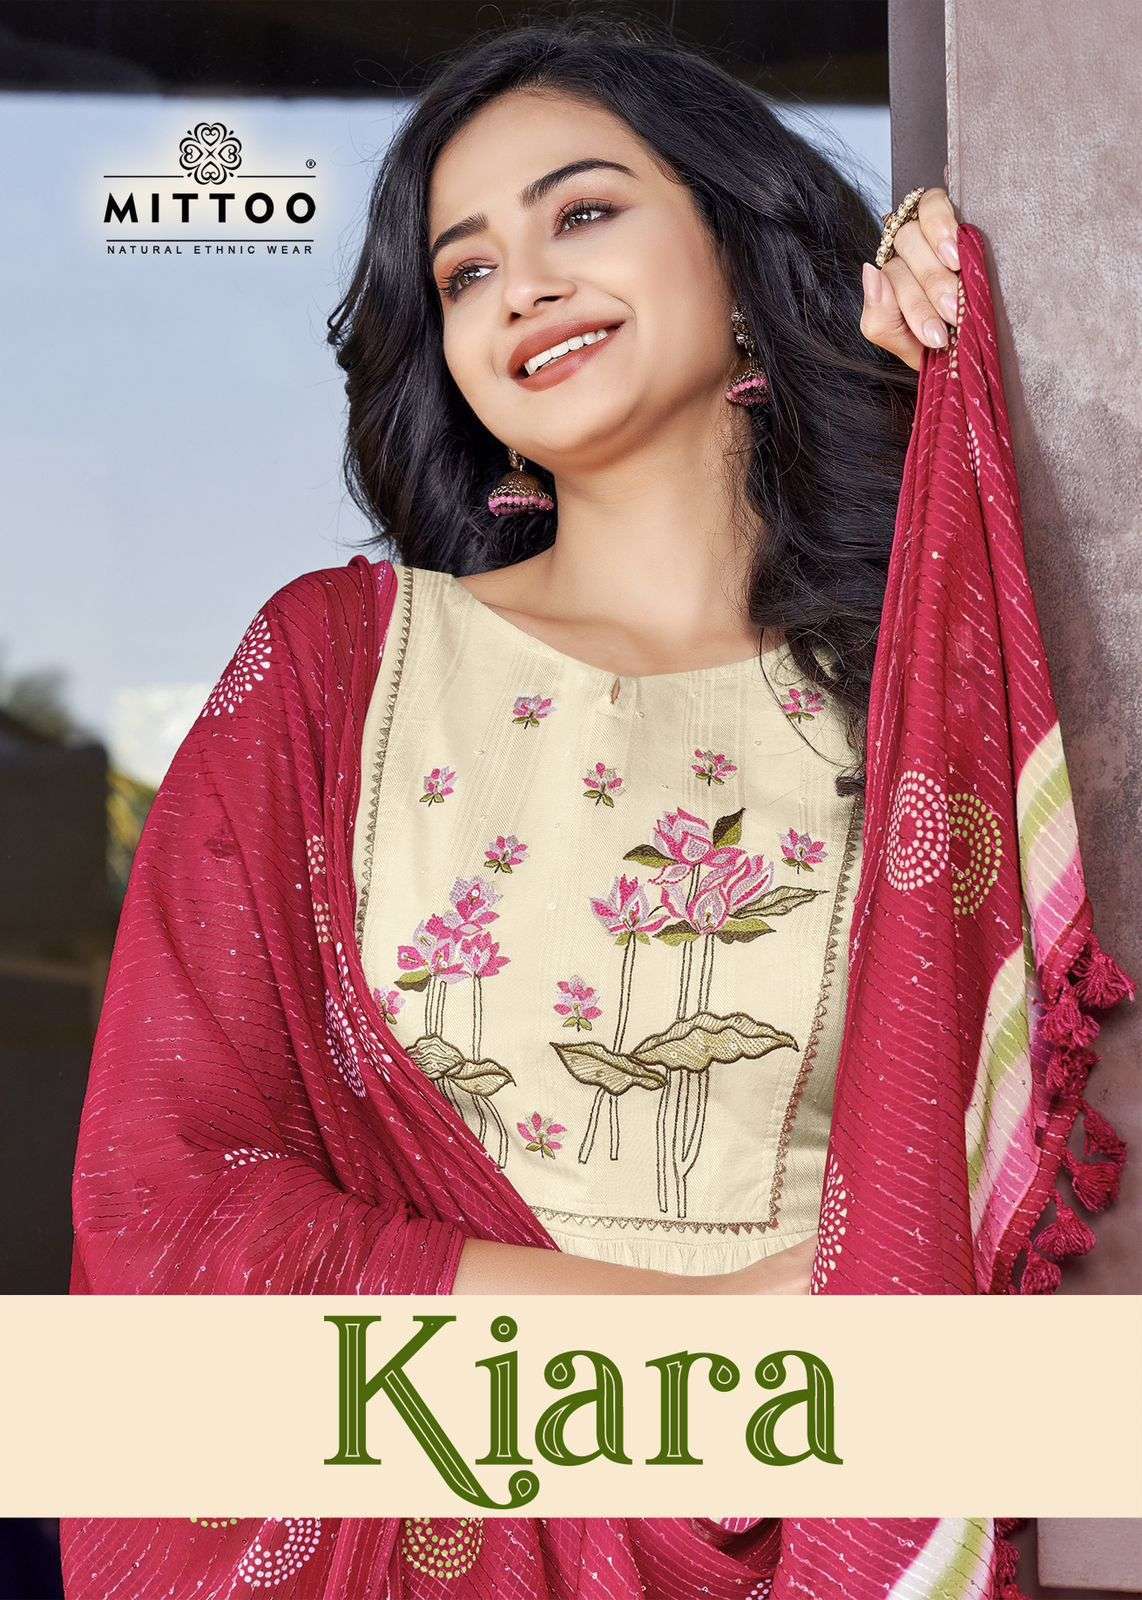 Mittoo Kiara Rayon with fancy Embroidery work Readymade suit...